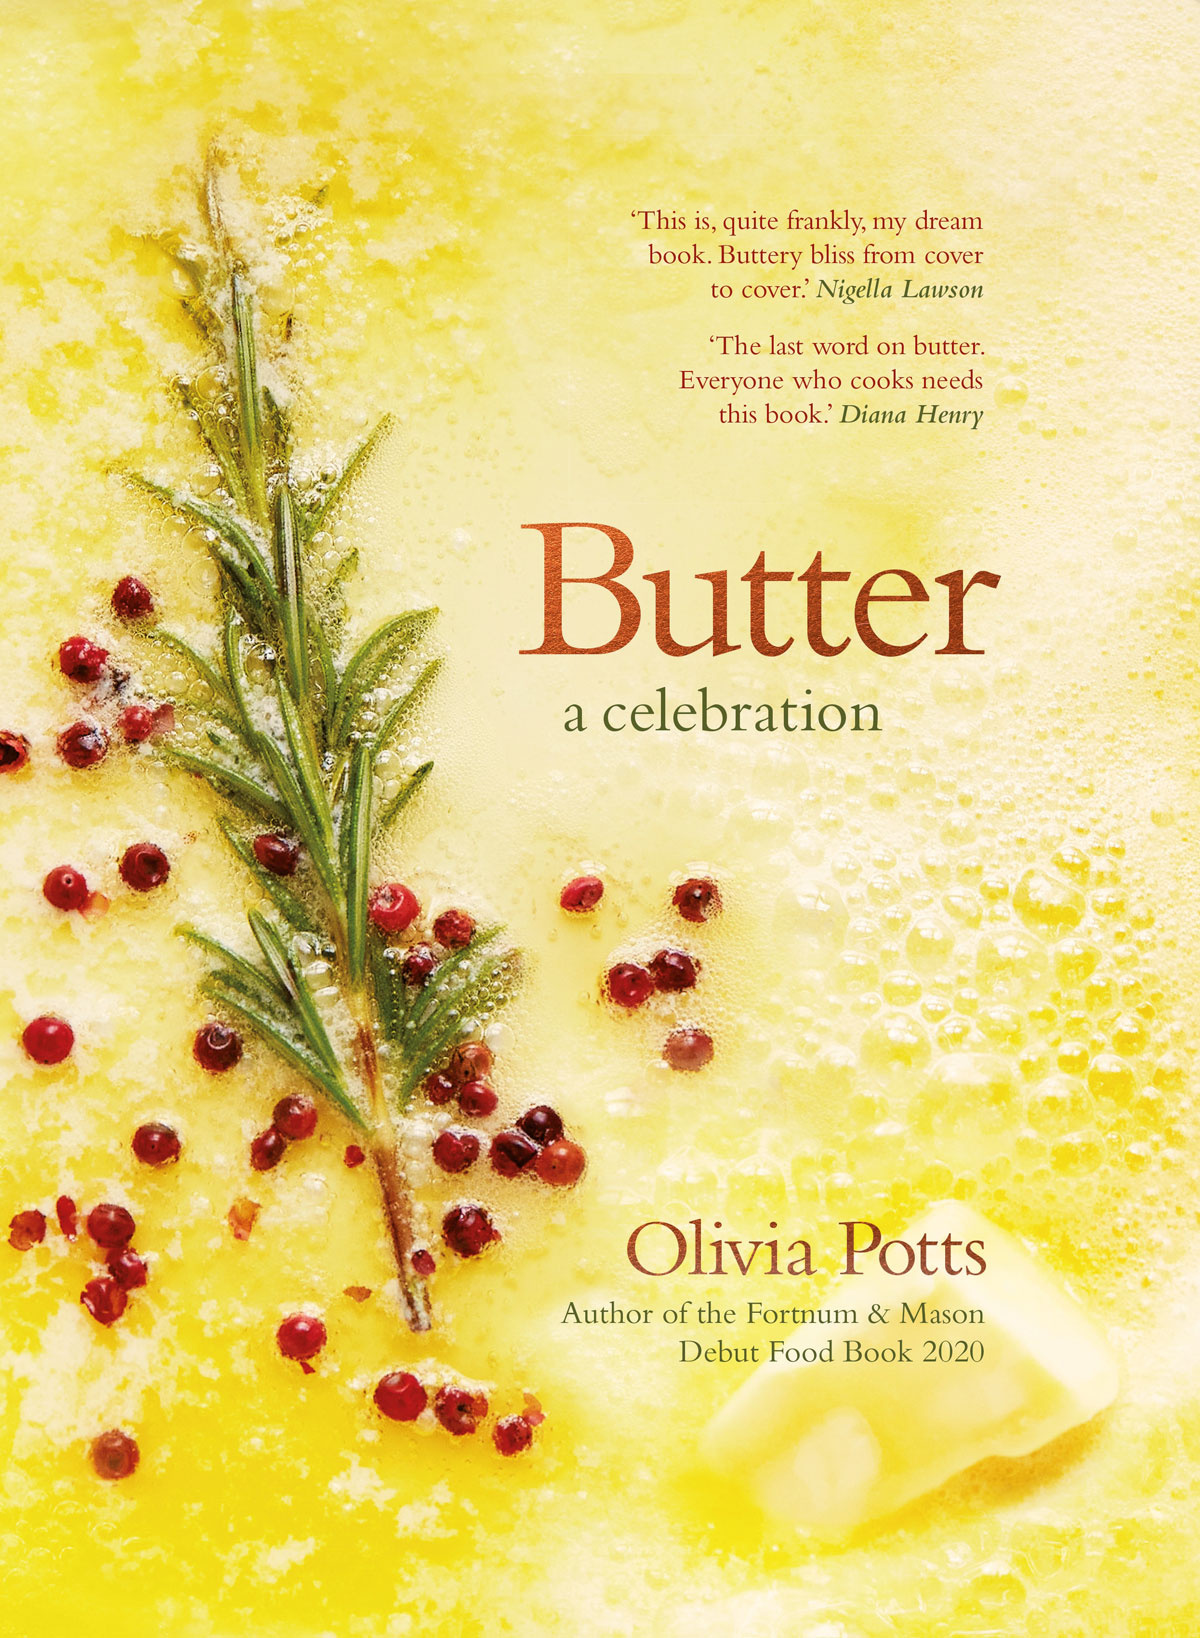 Book cover of Butter by Olivia Potts